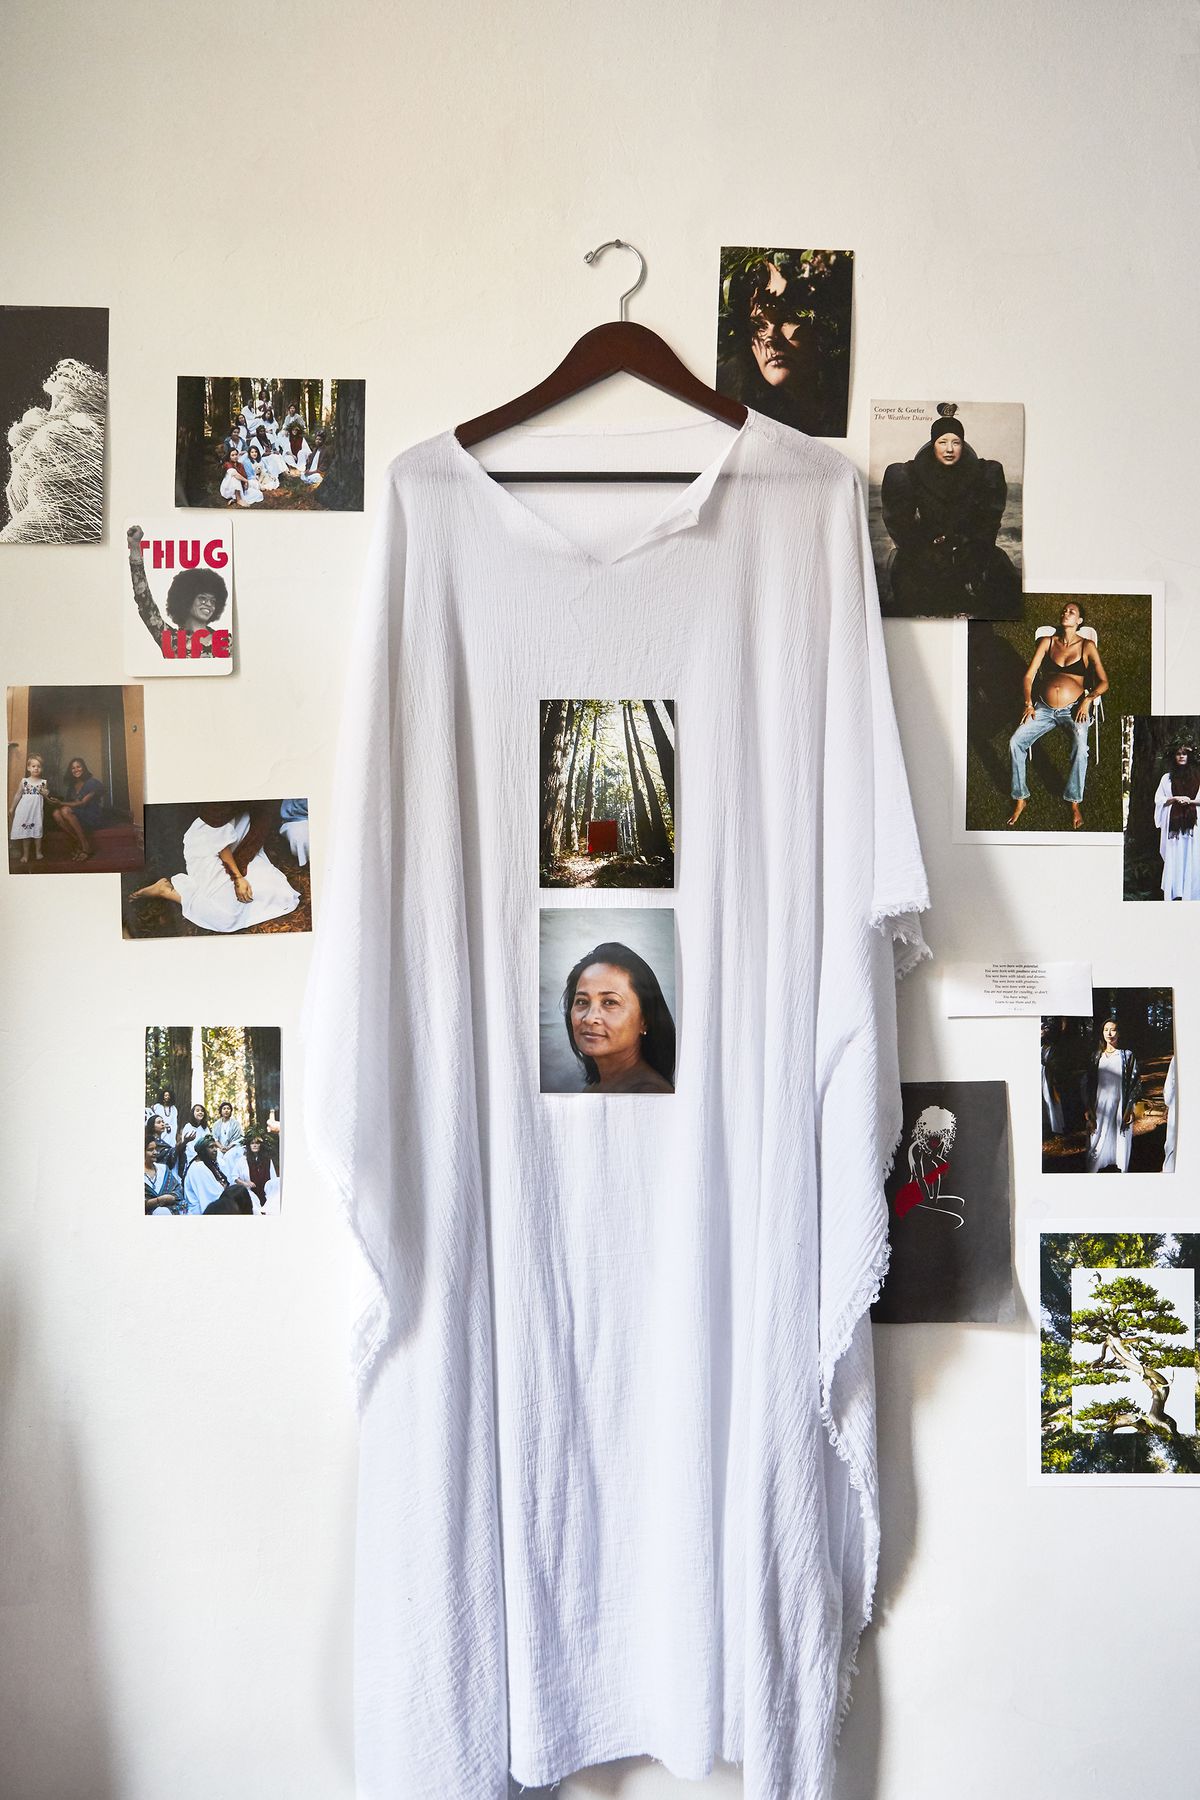 A white gown hangs on the wall and it’s surrounded by color photos.